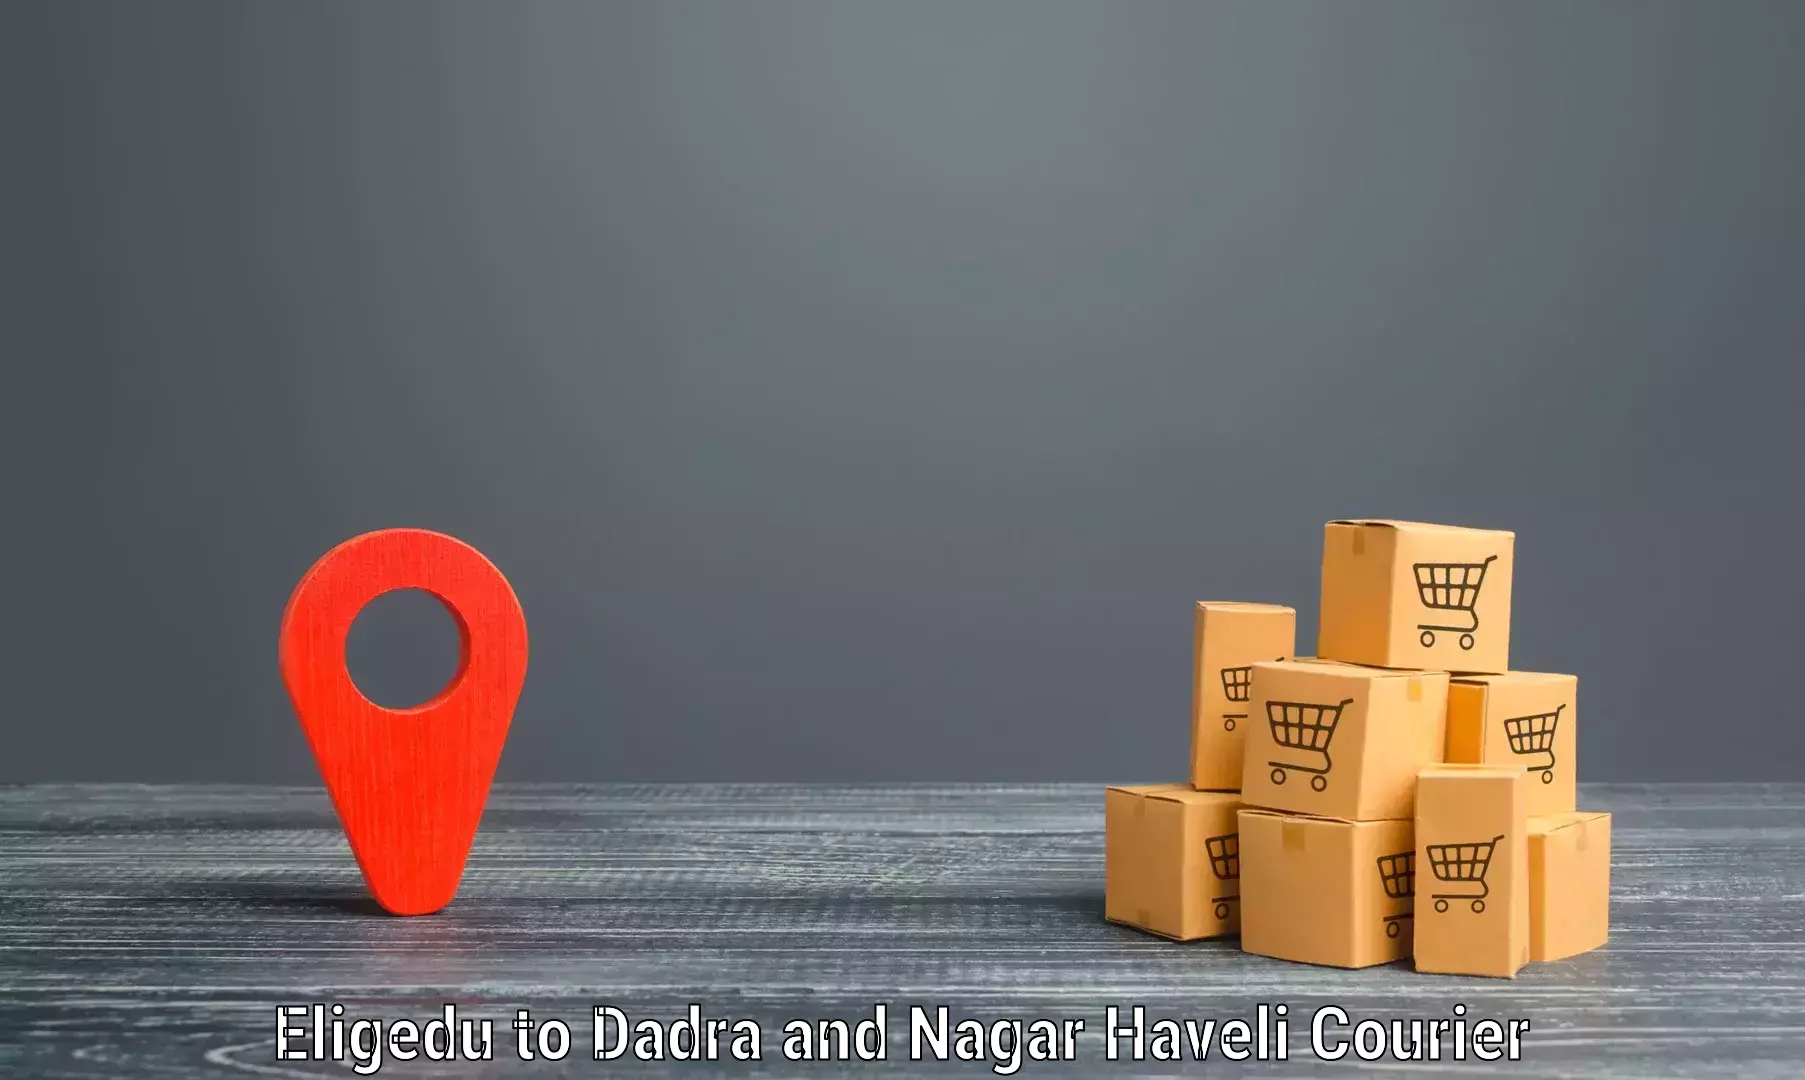 Local courier options in Eligedu to Dadra and Nagar Haveli